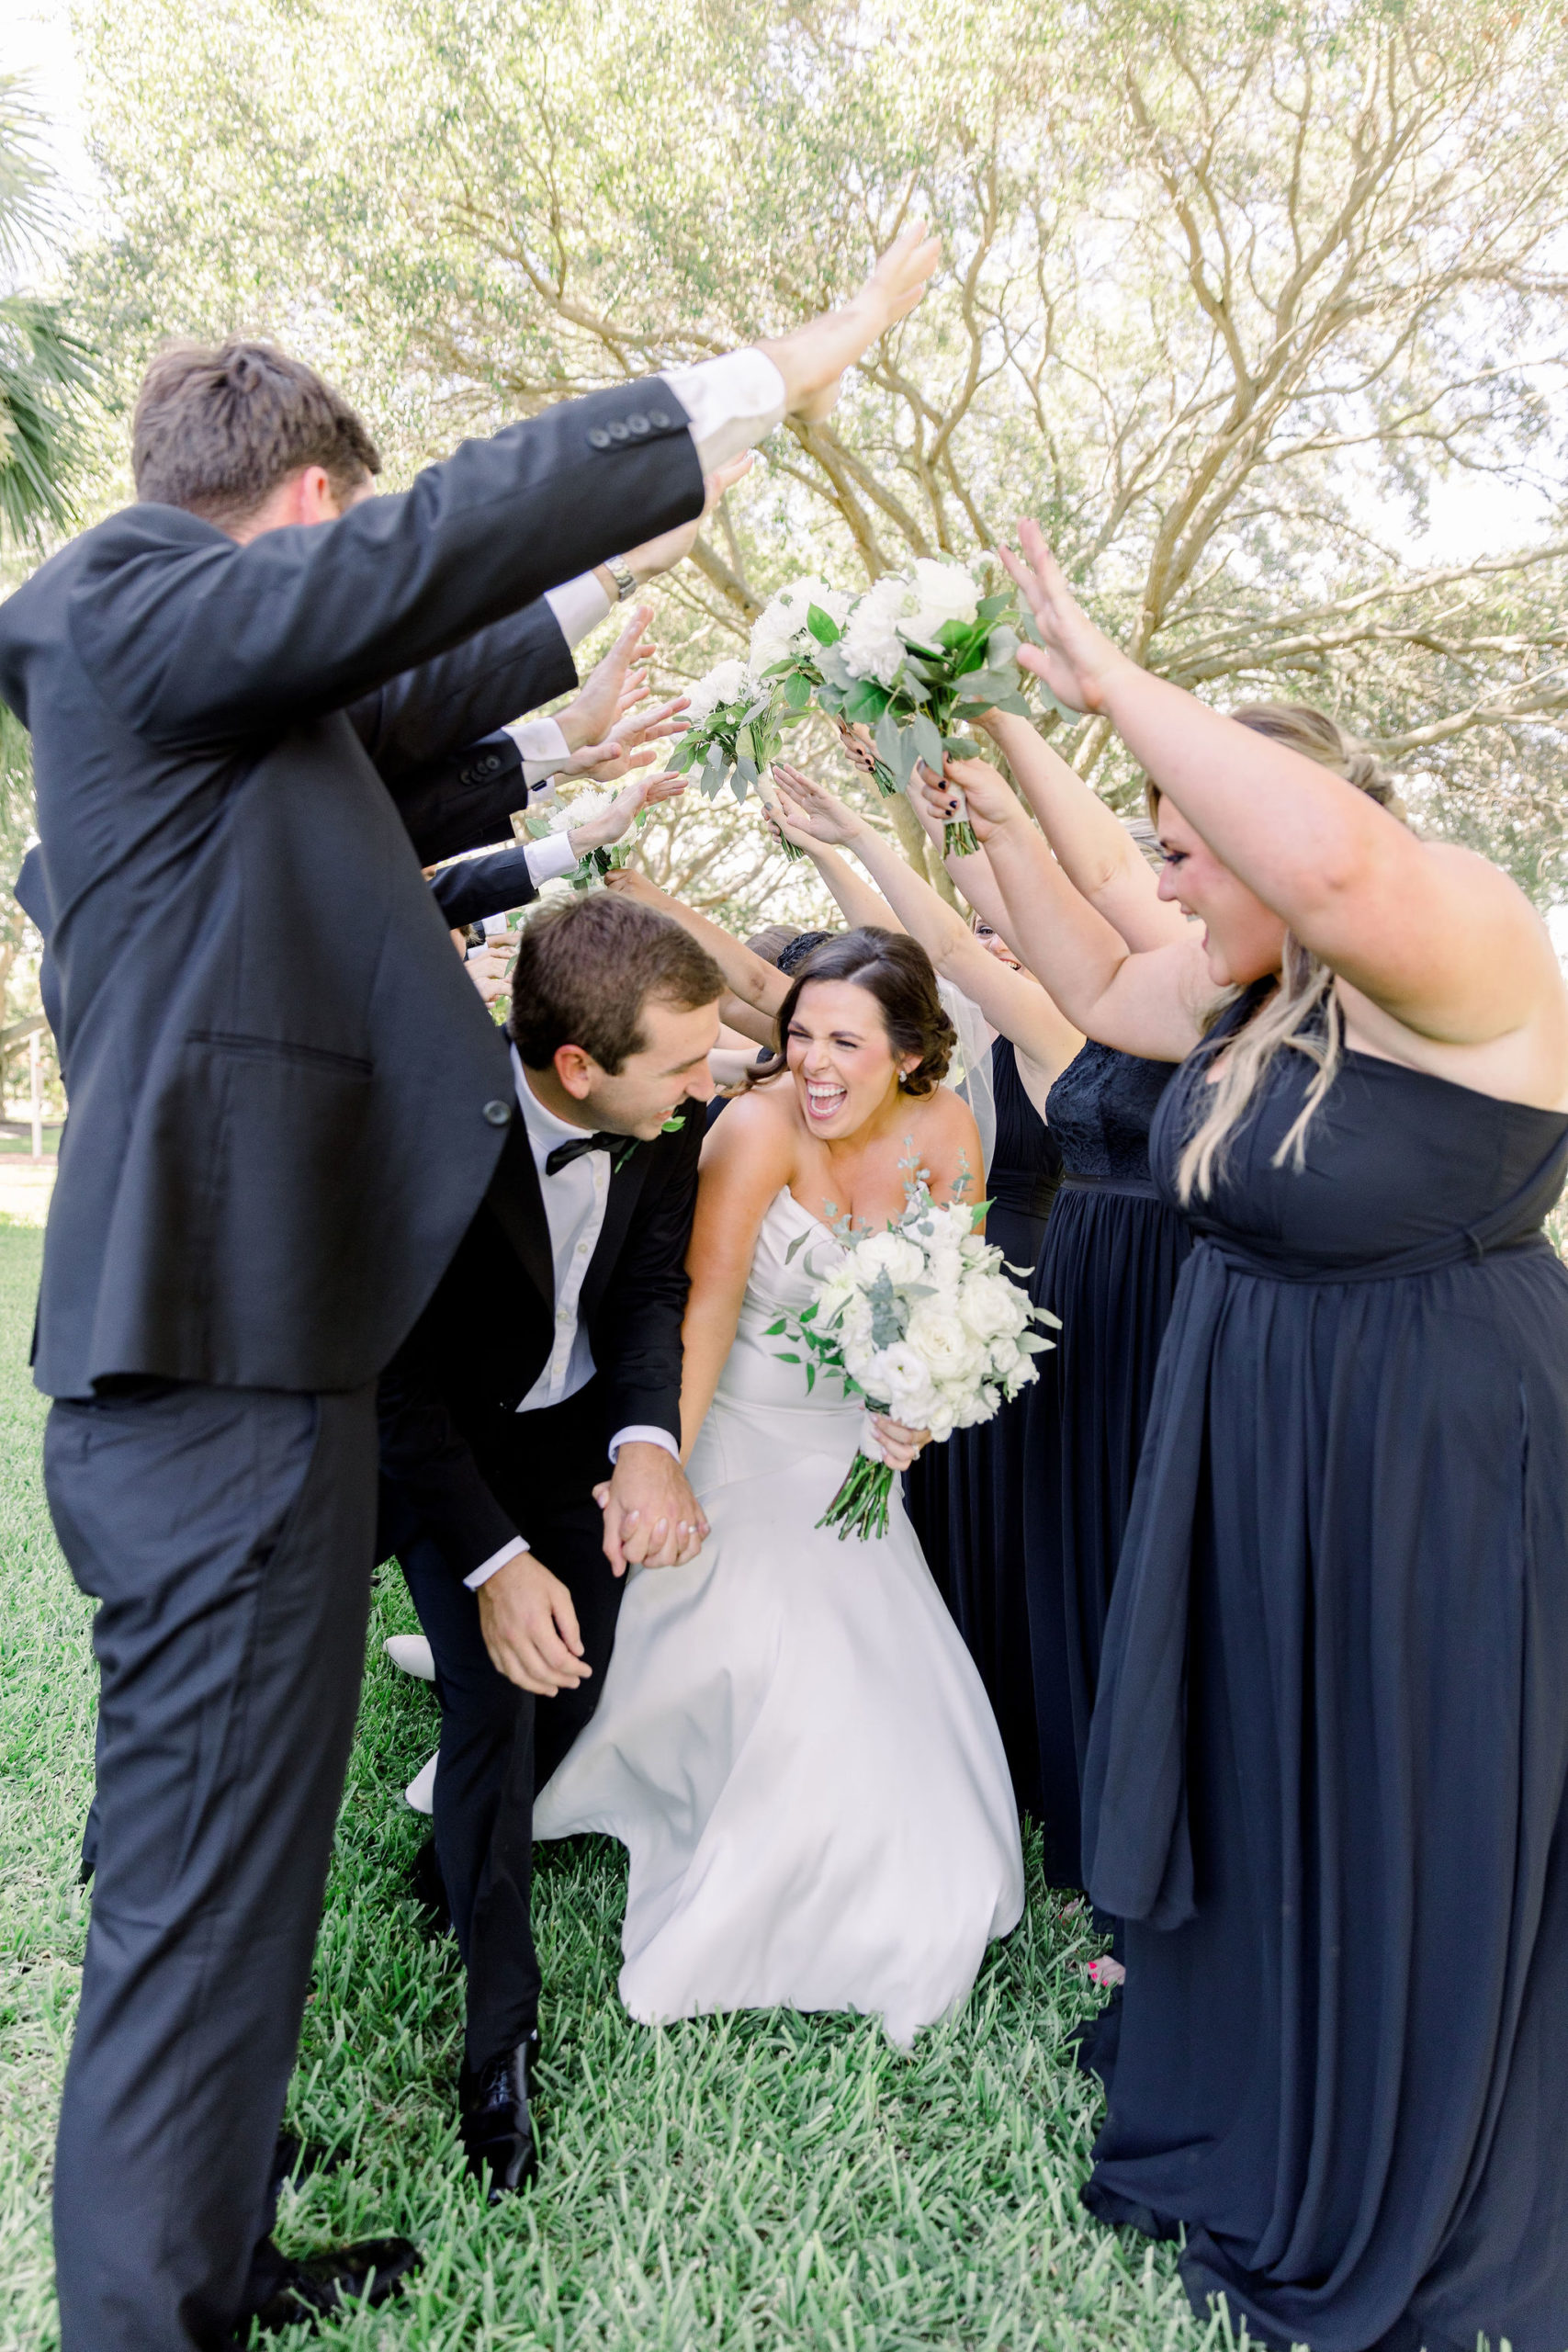 The groomsmen and bridesmaids make an arch pathway with their arms so the bride and groom can run through it by Jommy Photography. Florida wedding photographer captures a bride party making a archway for the newly wed couple.
